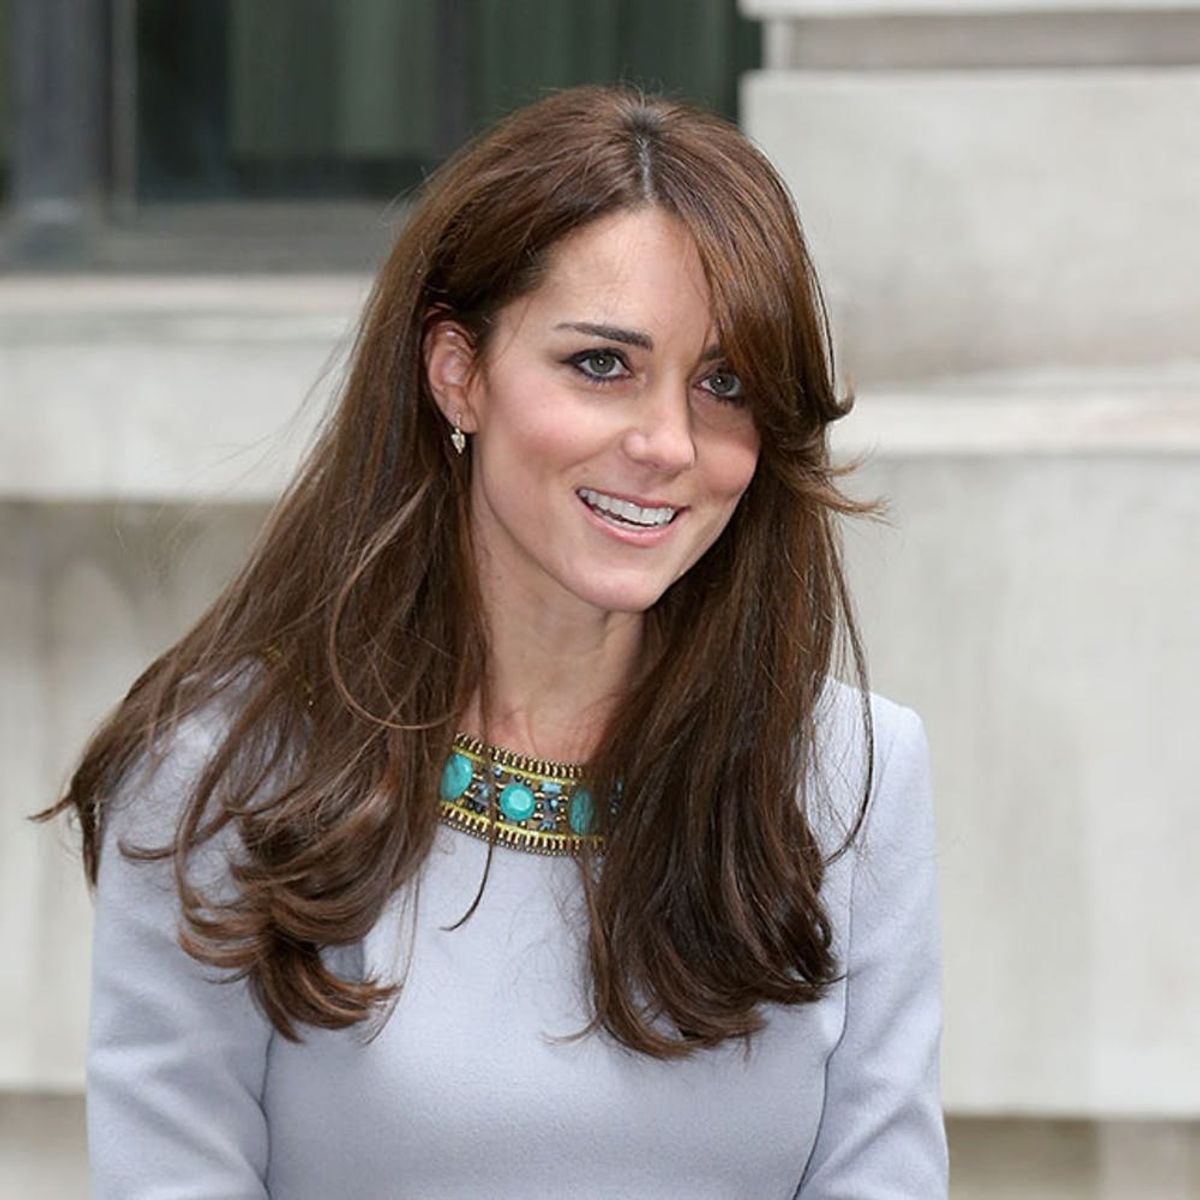 Kate Middleton’s New Haircut Proves a Little Change Can Make a Big Difference